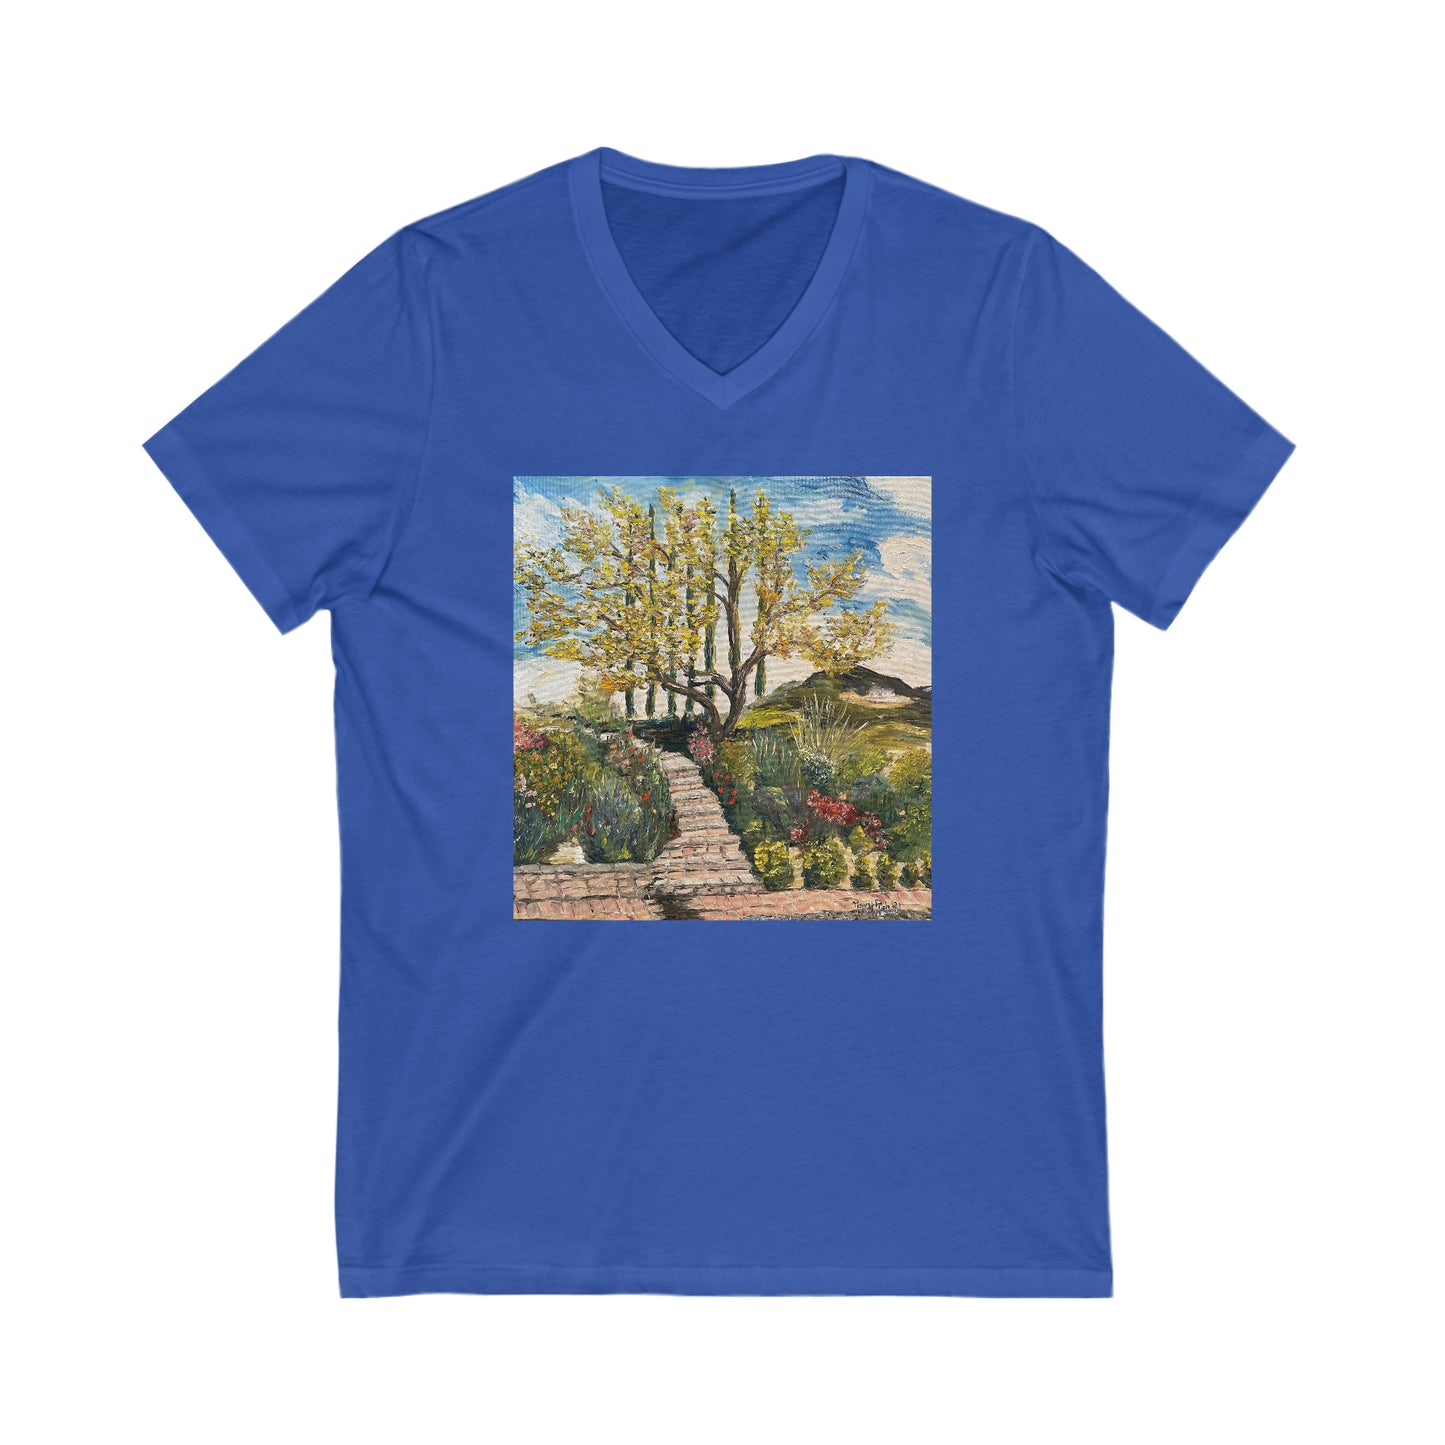 The Tree and Garden (GBV) Gershon Bachus Vintners-Unisex Jersey Short Sleeve V-Neck Tee